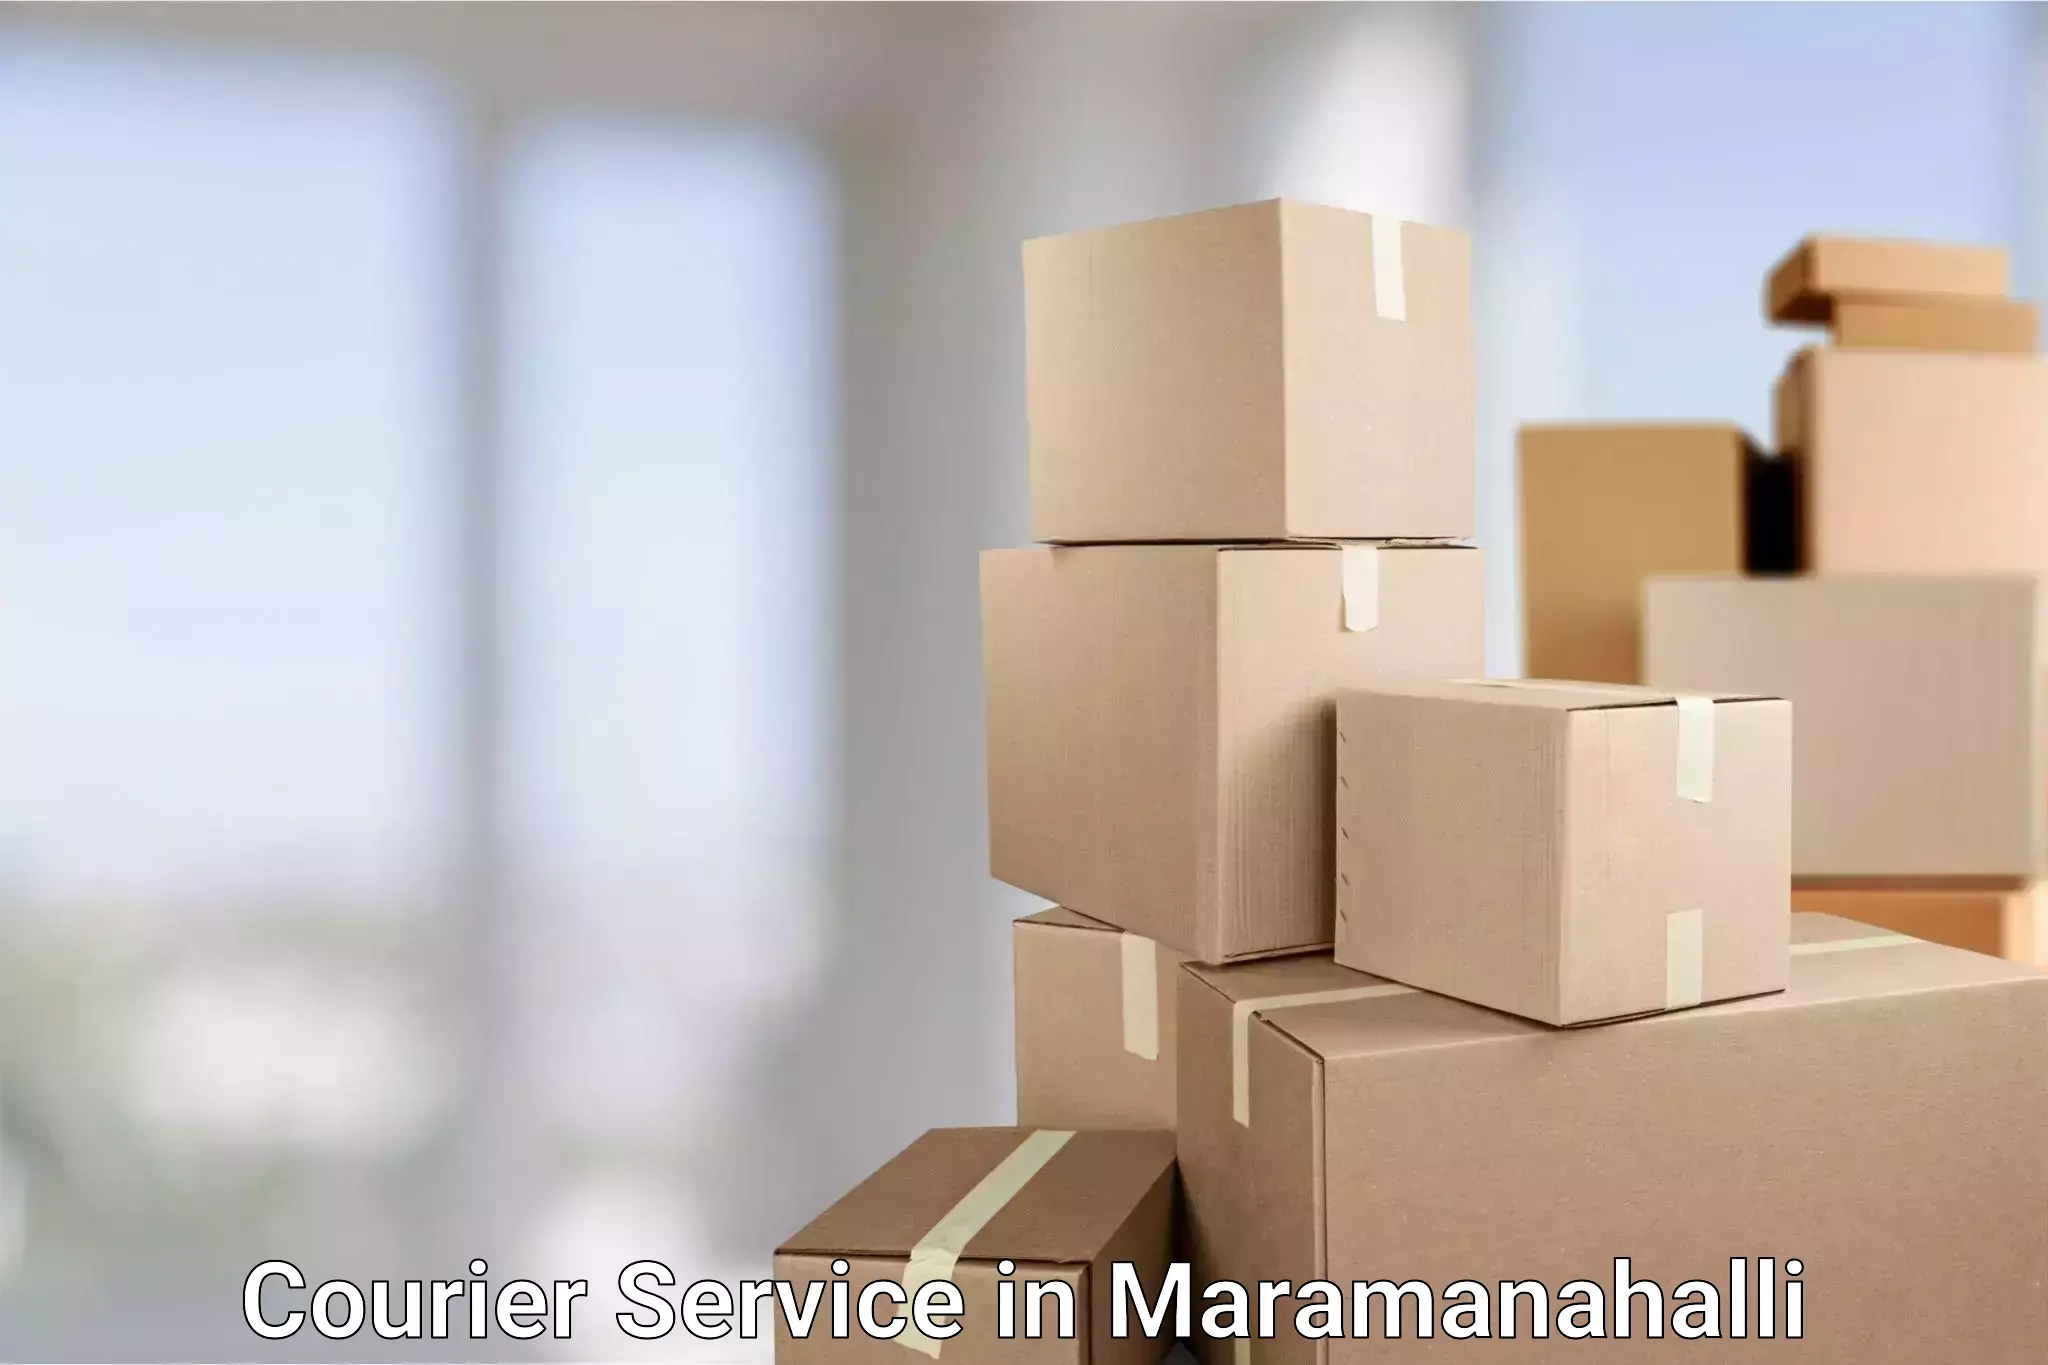 Same-day delivery solutions in Maramanahalli